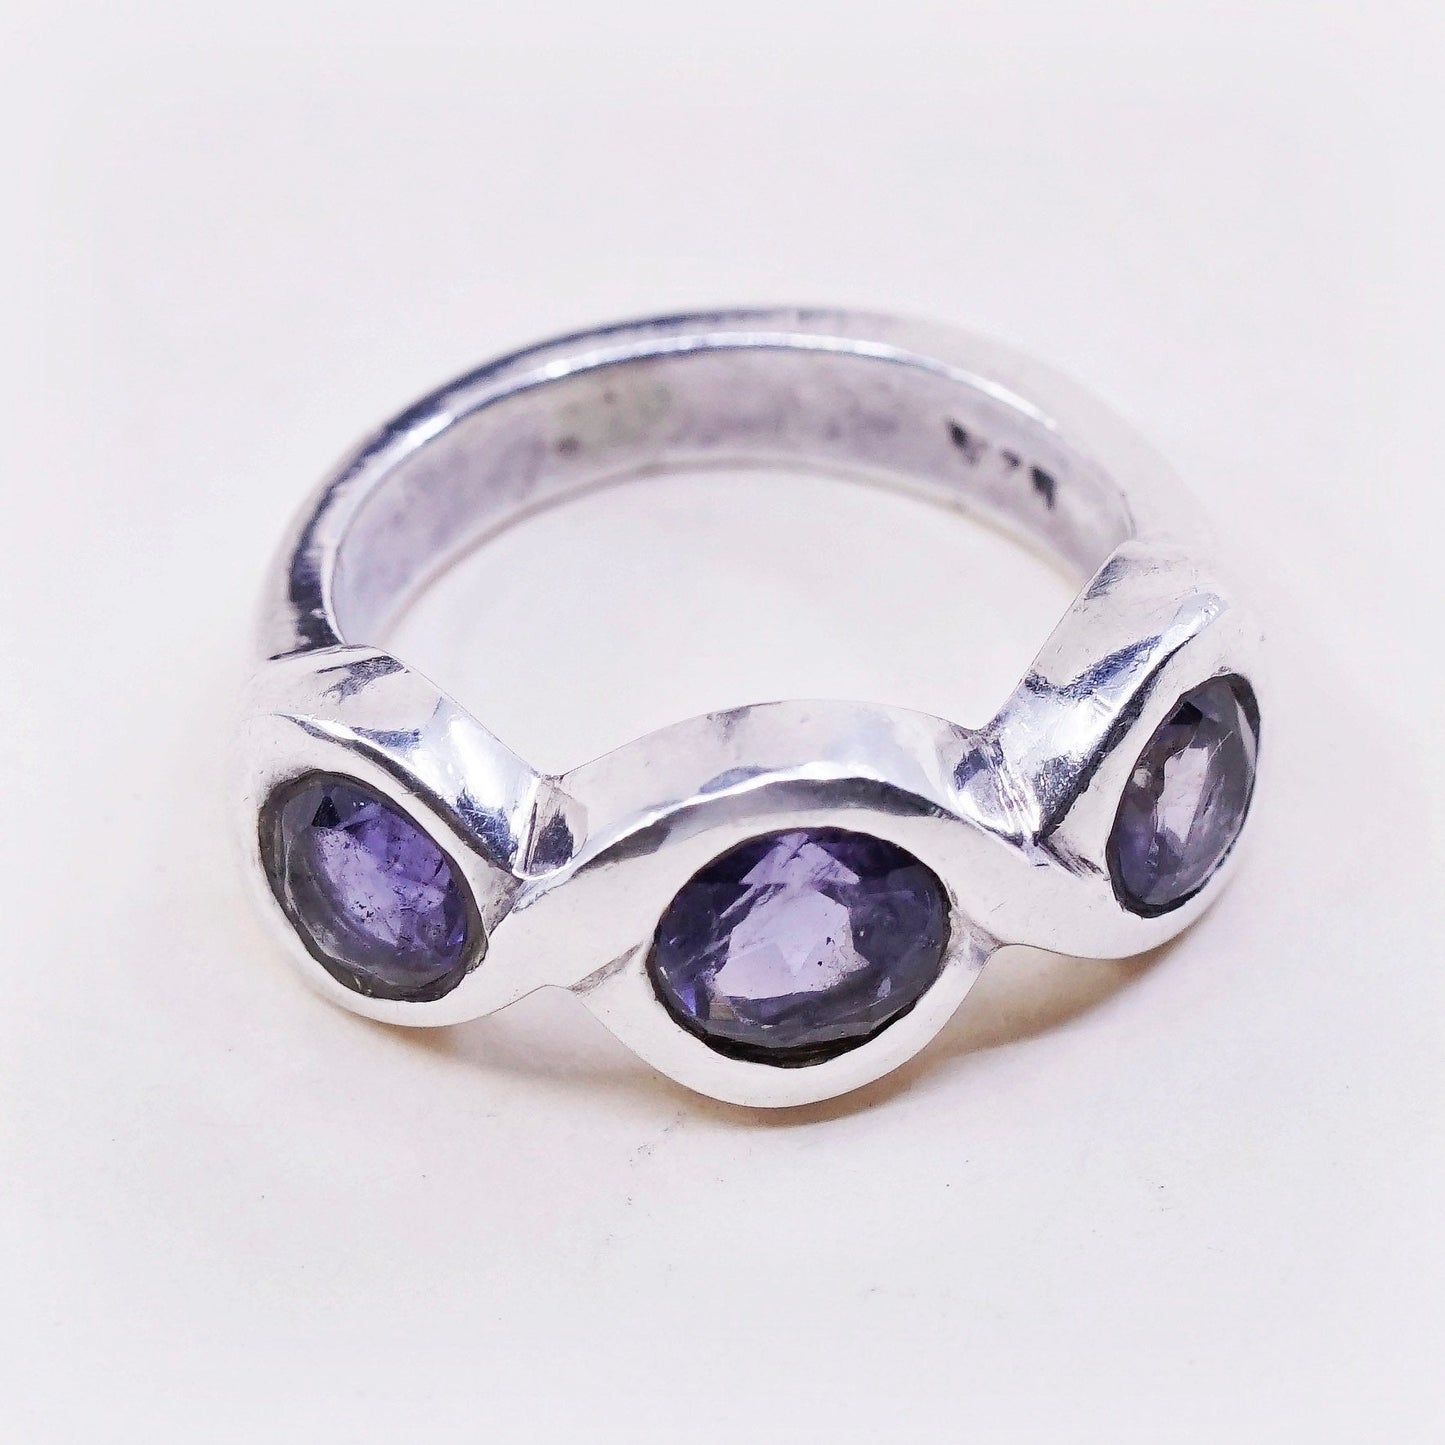 Size 5.25, vintage Sterling silver handmade ring, 925 band with amethyst